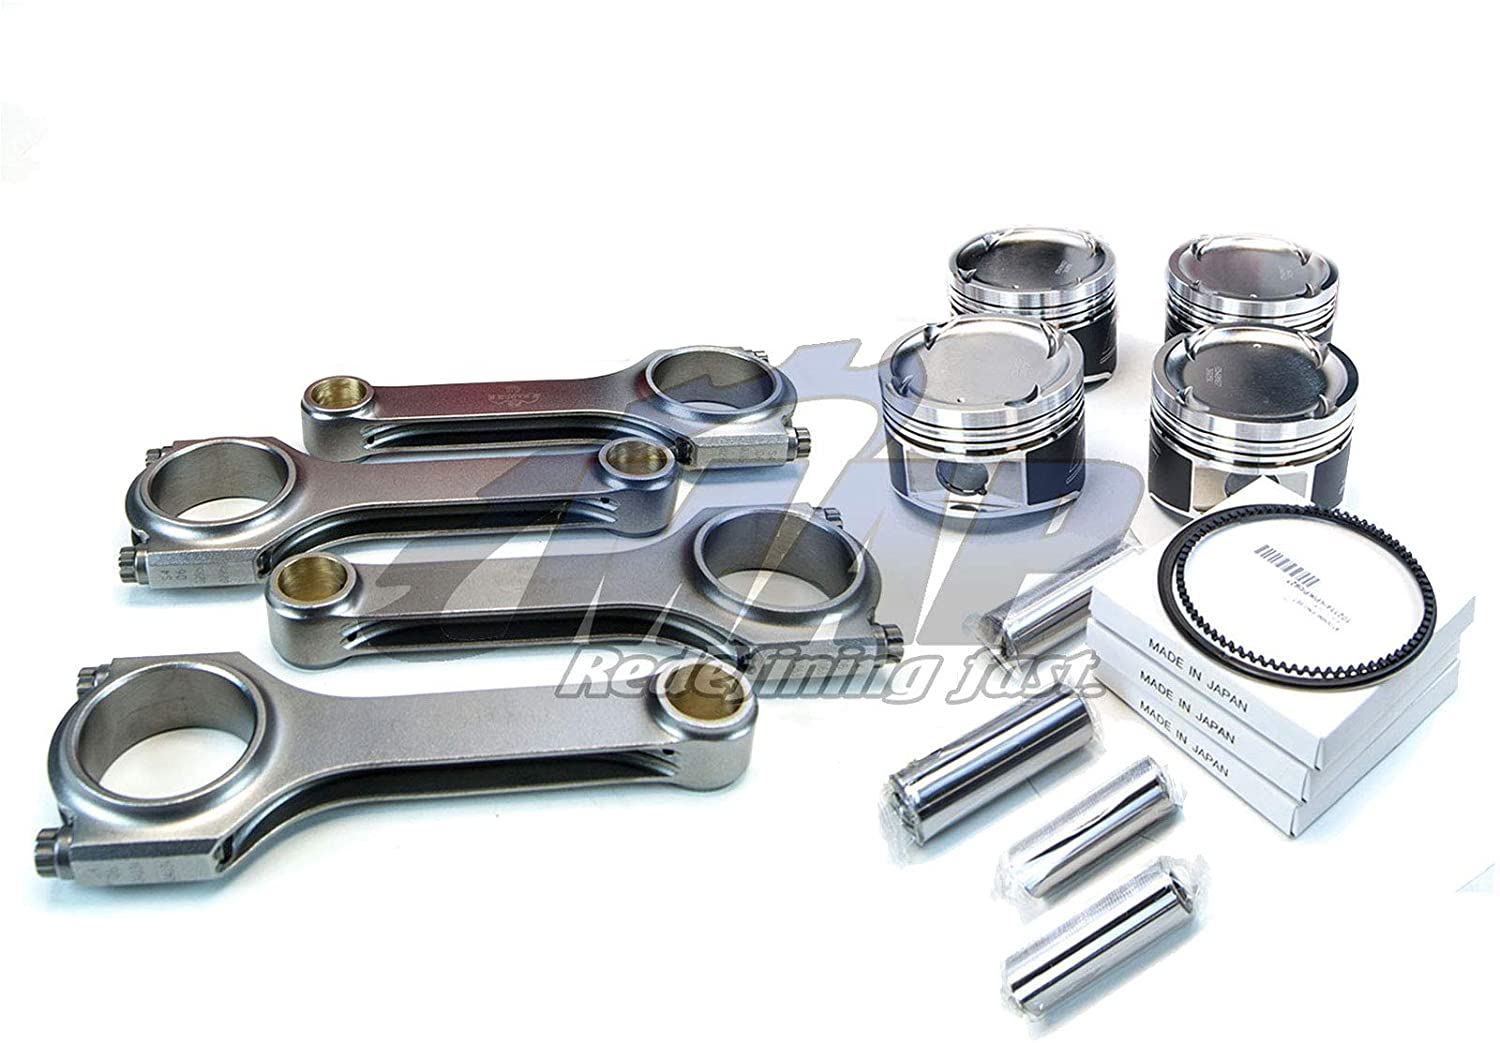 Manley Pistons 99.75mm Bore 8.5:1 & H-Beam Connecting Rods Kit Compatible with 06-14 Subaru WRX 04+ STi EJ25